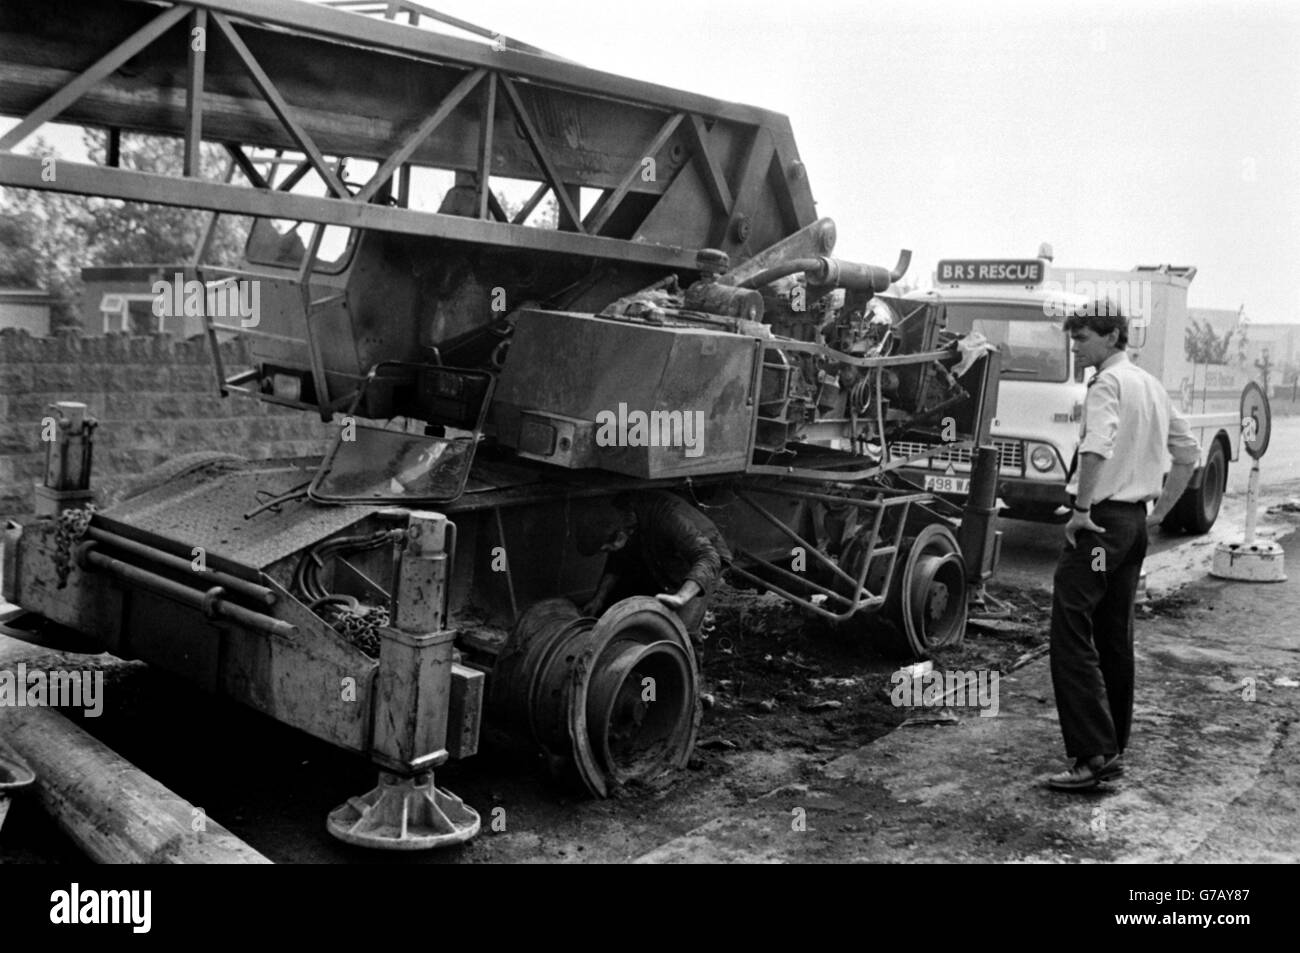 A burnt out crane at the entrance to the Markham Main NCB Colliery at Armthorpe, near Doncaster, Yorkshire, when equipment and machinery were damaged in a raid by a group dressed in para-military style. Stock Photo